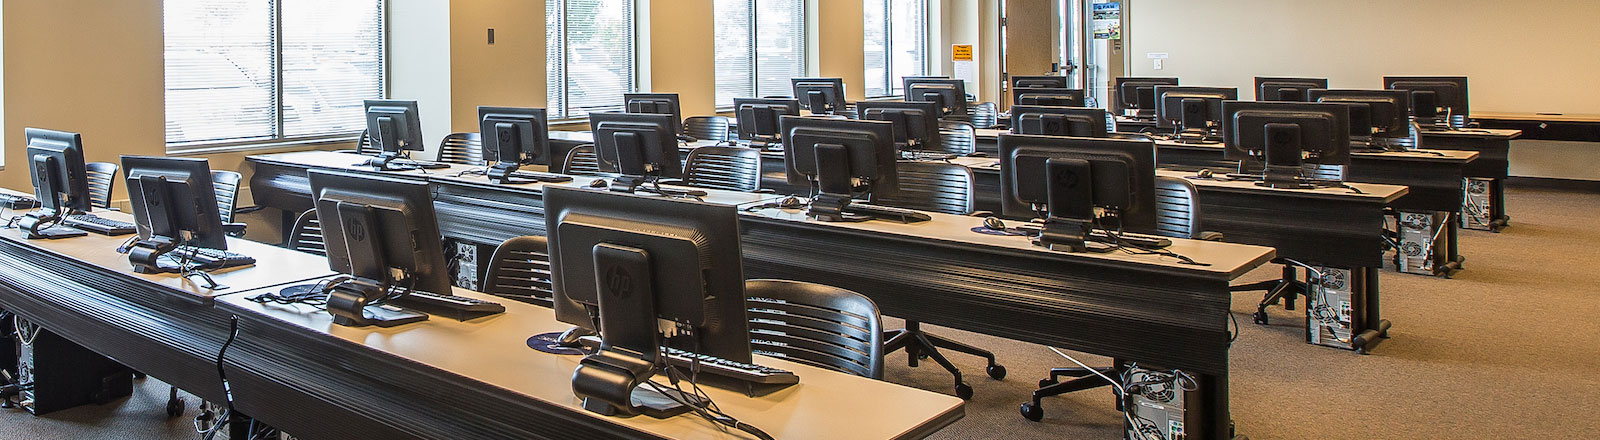 Lab/Classroom of Available computers